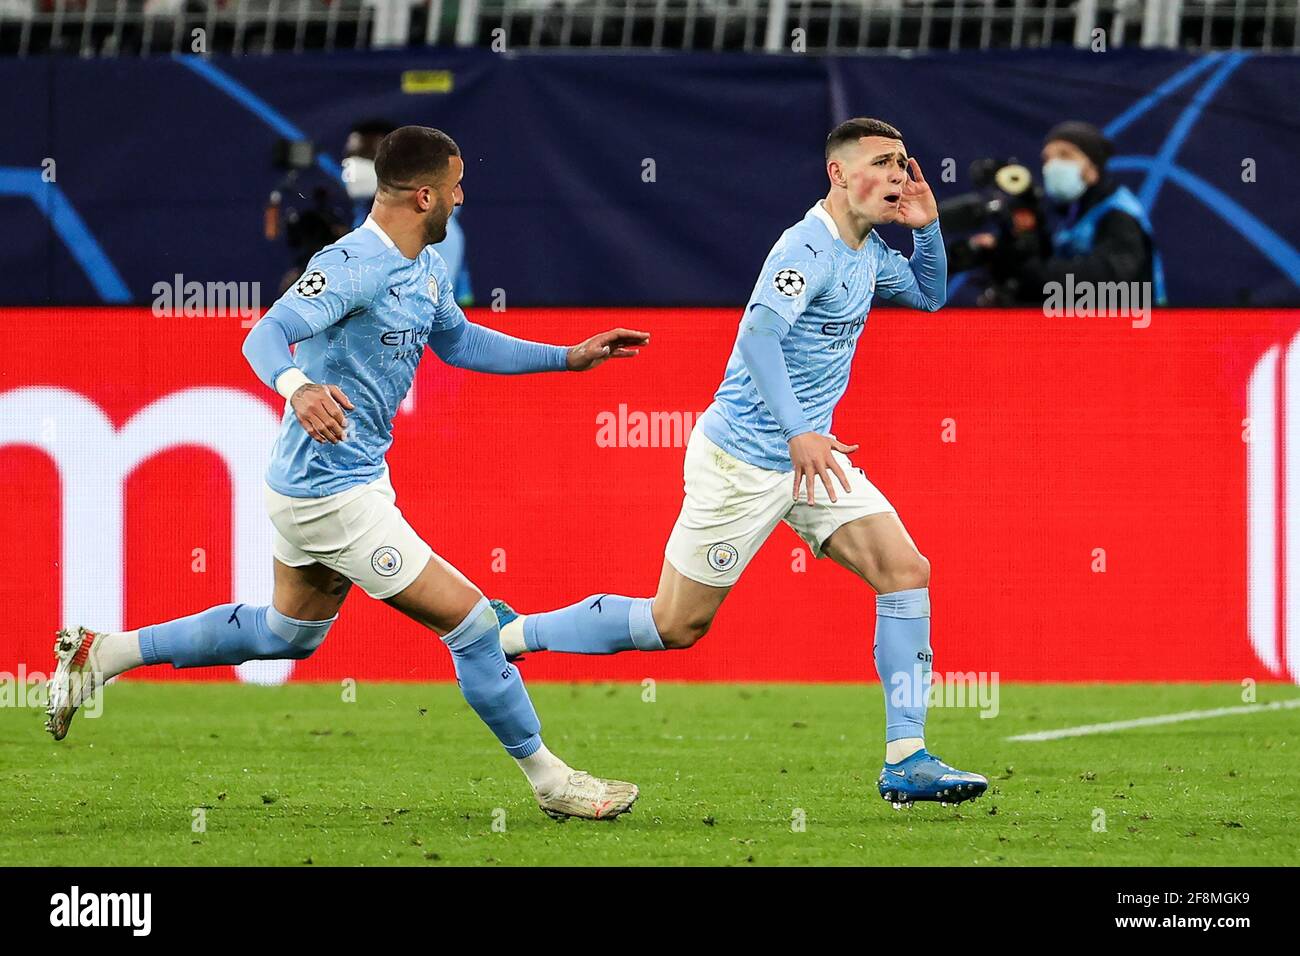 Dortmund, Germany. 14th Apr, 2021. Phil Foden (R) of Manchester City celebrates after scoring during a UEFA Champions League quarterfinal second leg match between Borussia Dortmund and Manchester City in Dortmund, Germany, April 14, 2021. Credit: Joachim Bywaletz/Xinhua/Alamy Live News Stock Photo